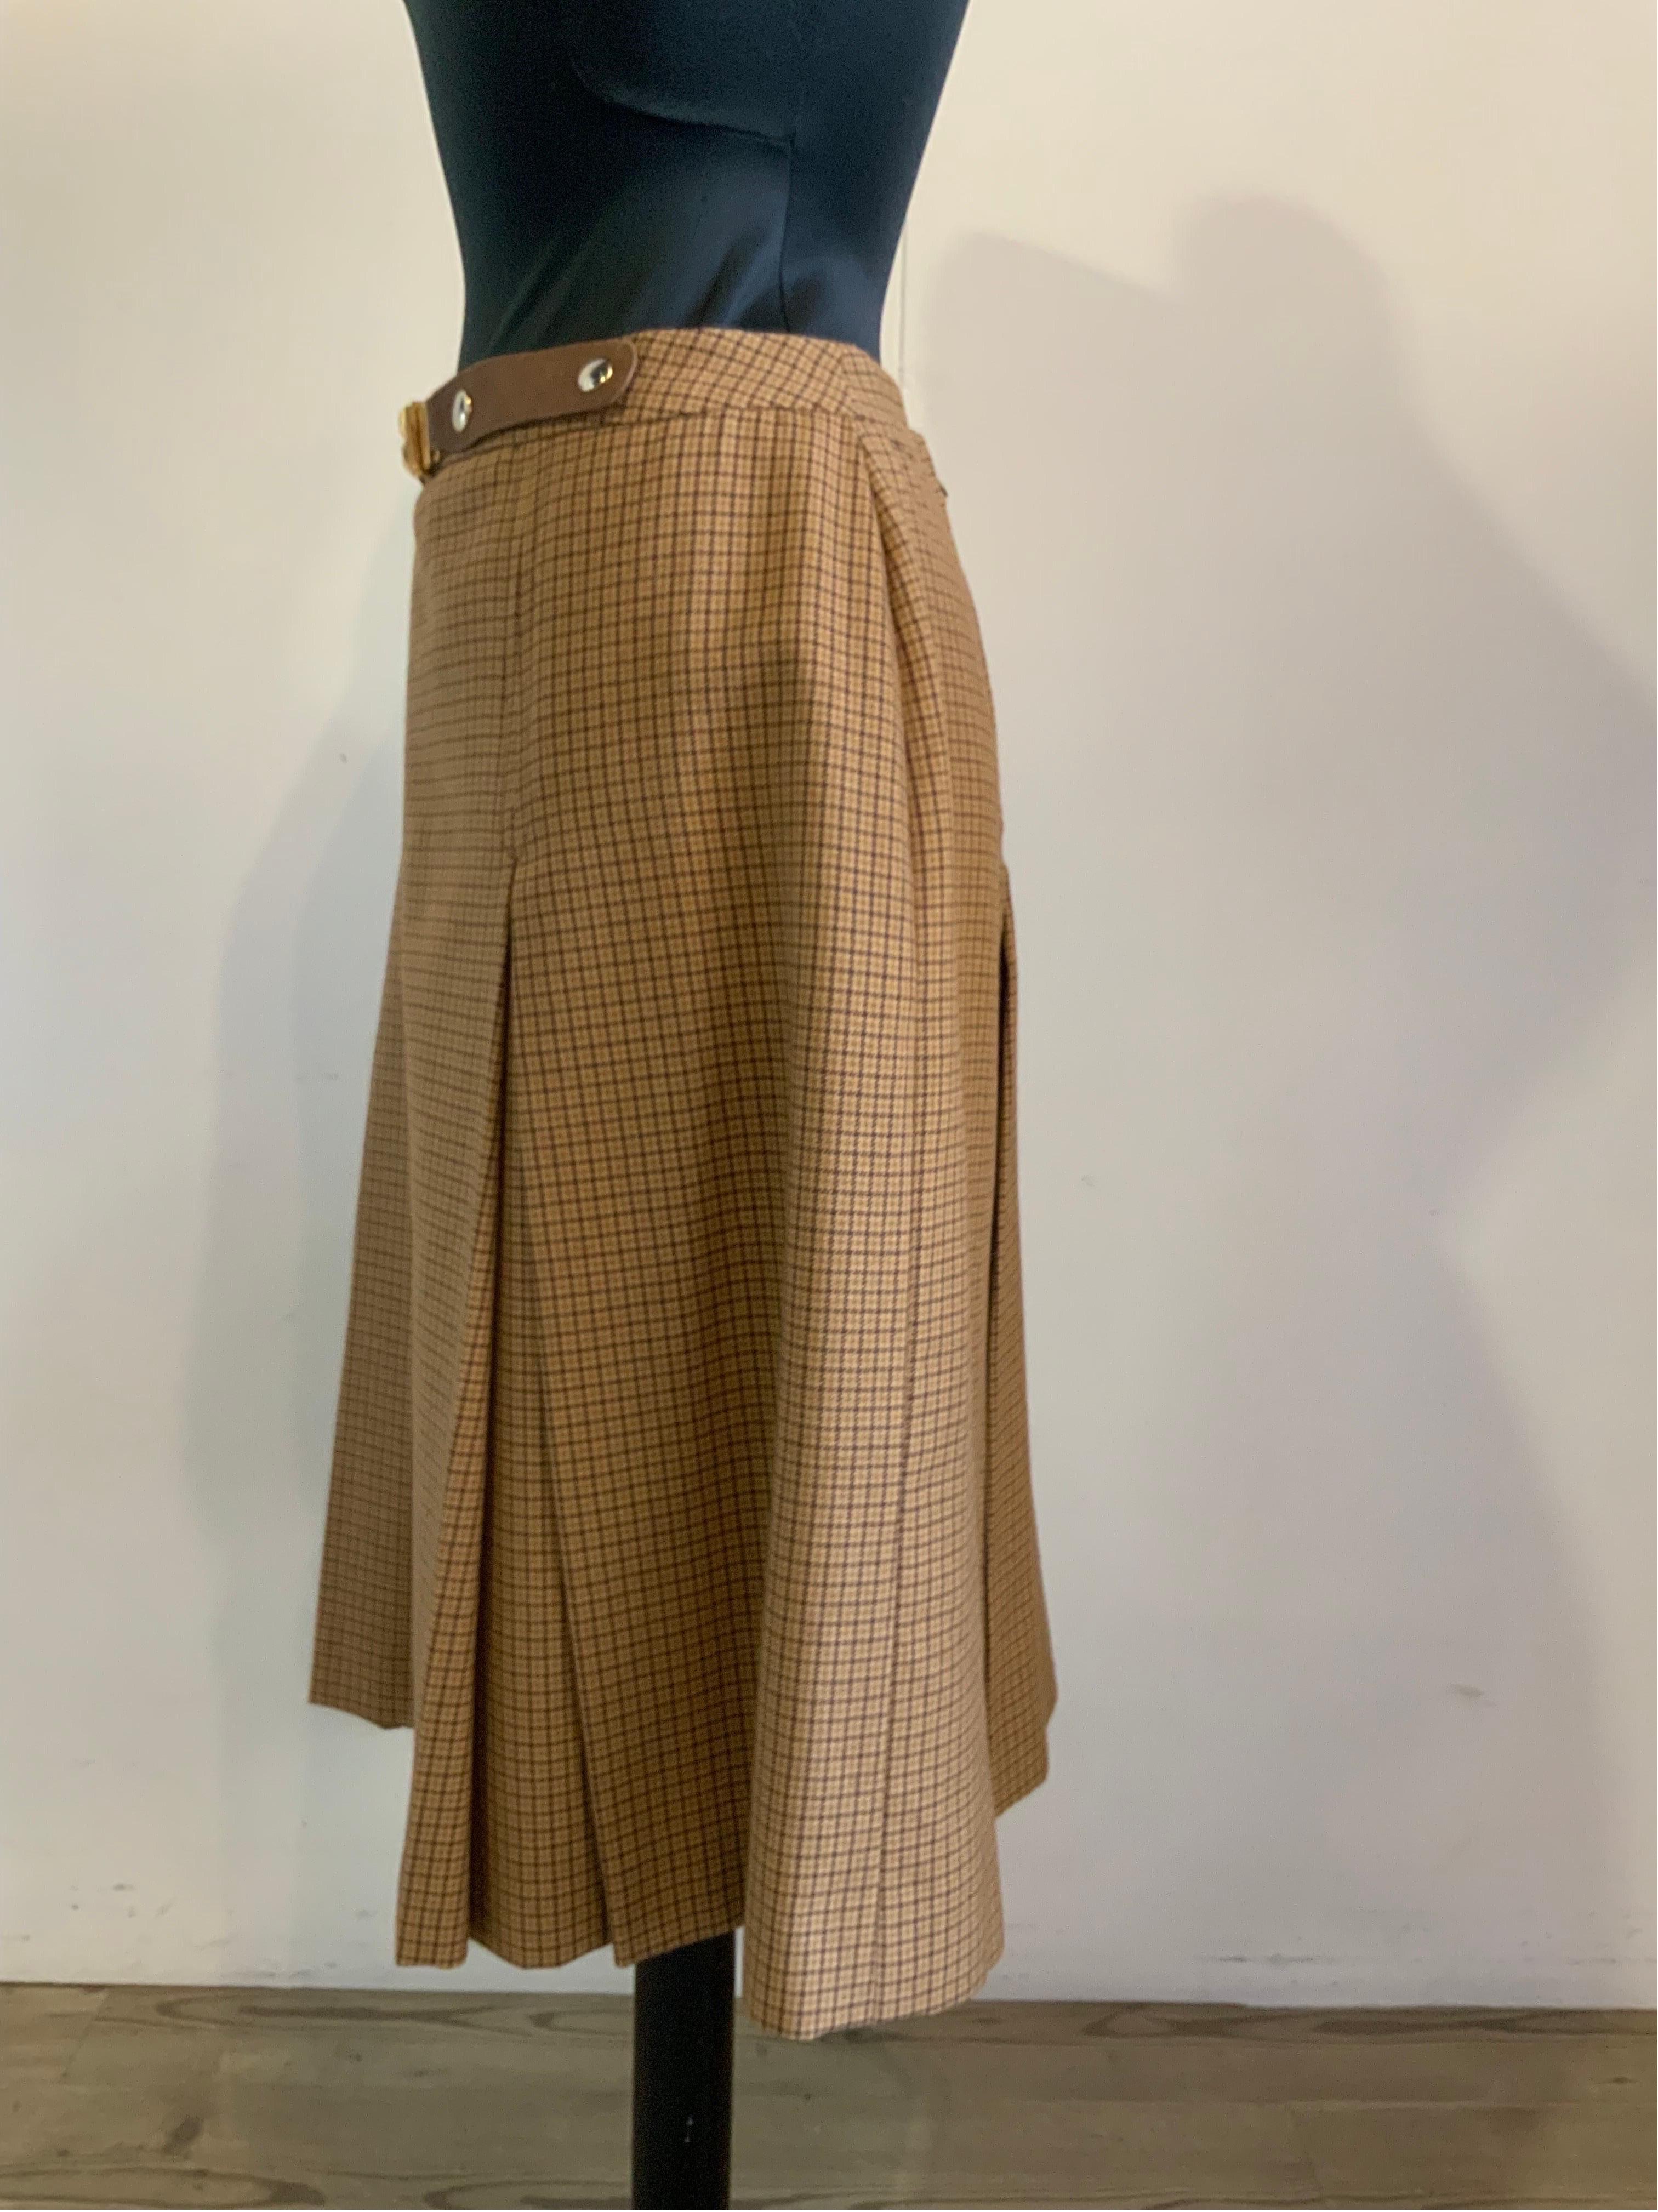 Celine vintage check brown Midi Skirt In Good Condition For Sale In Carnate, IT